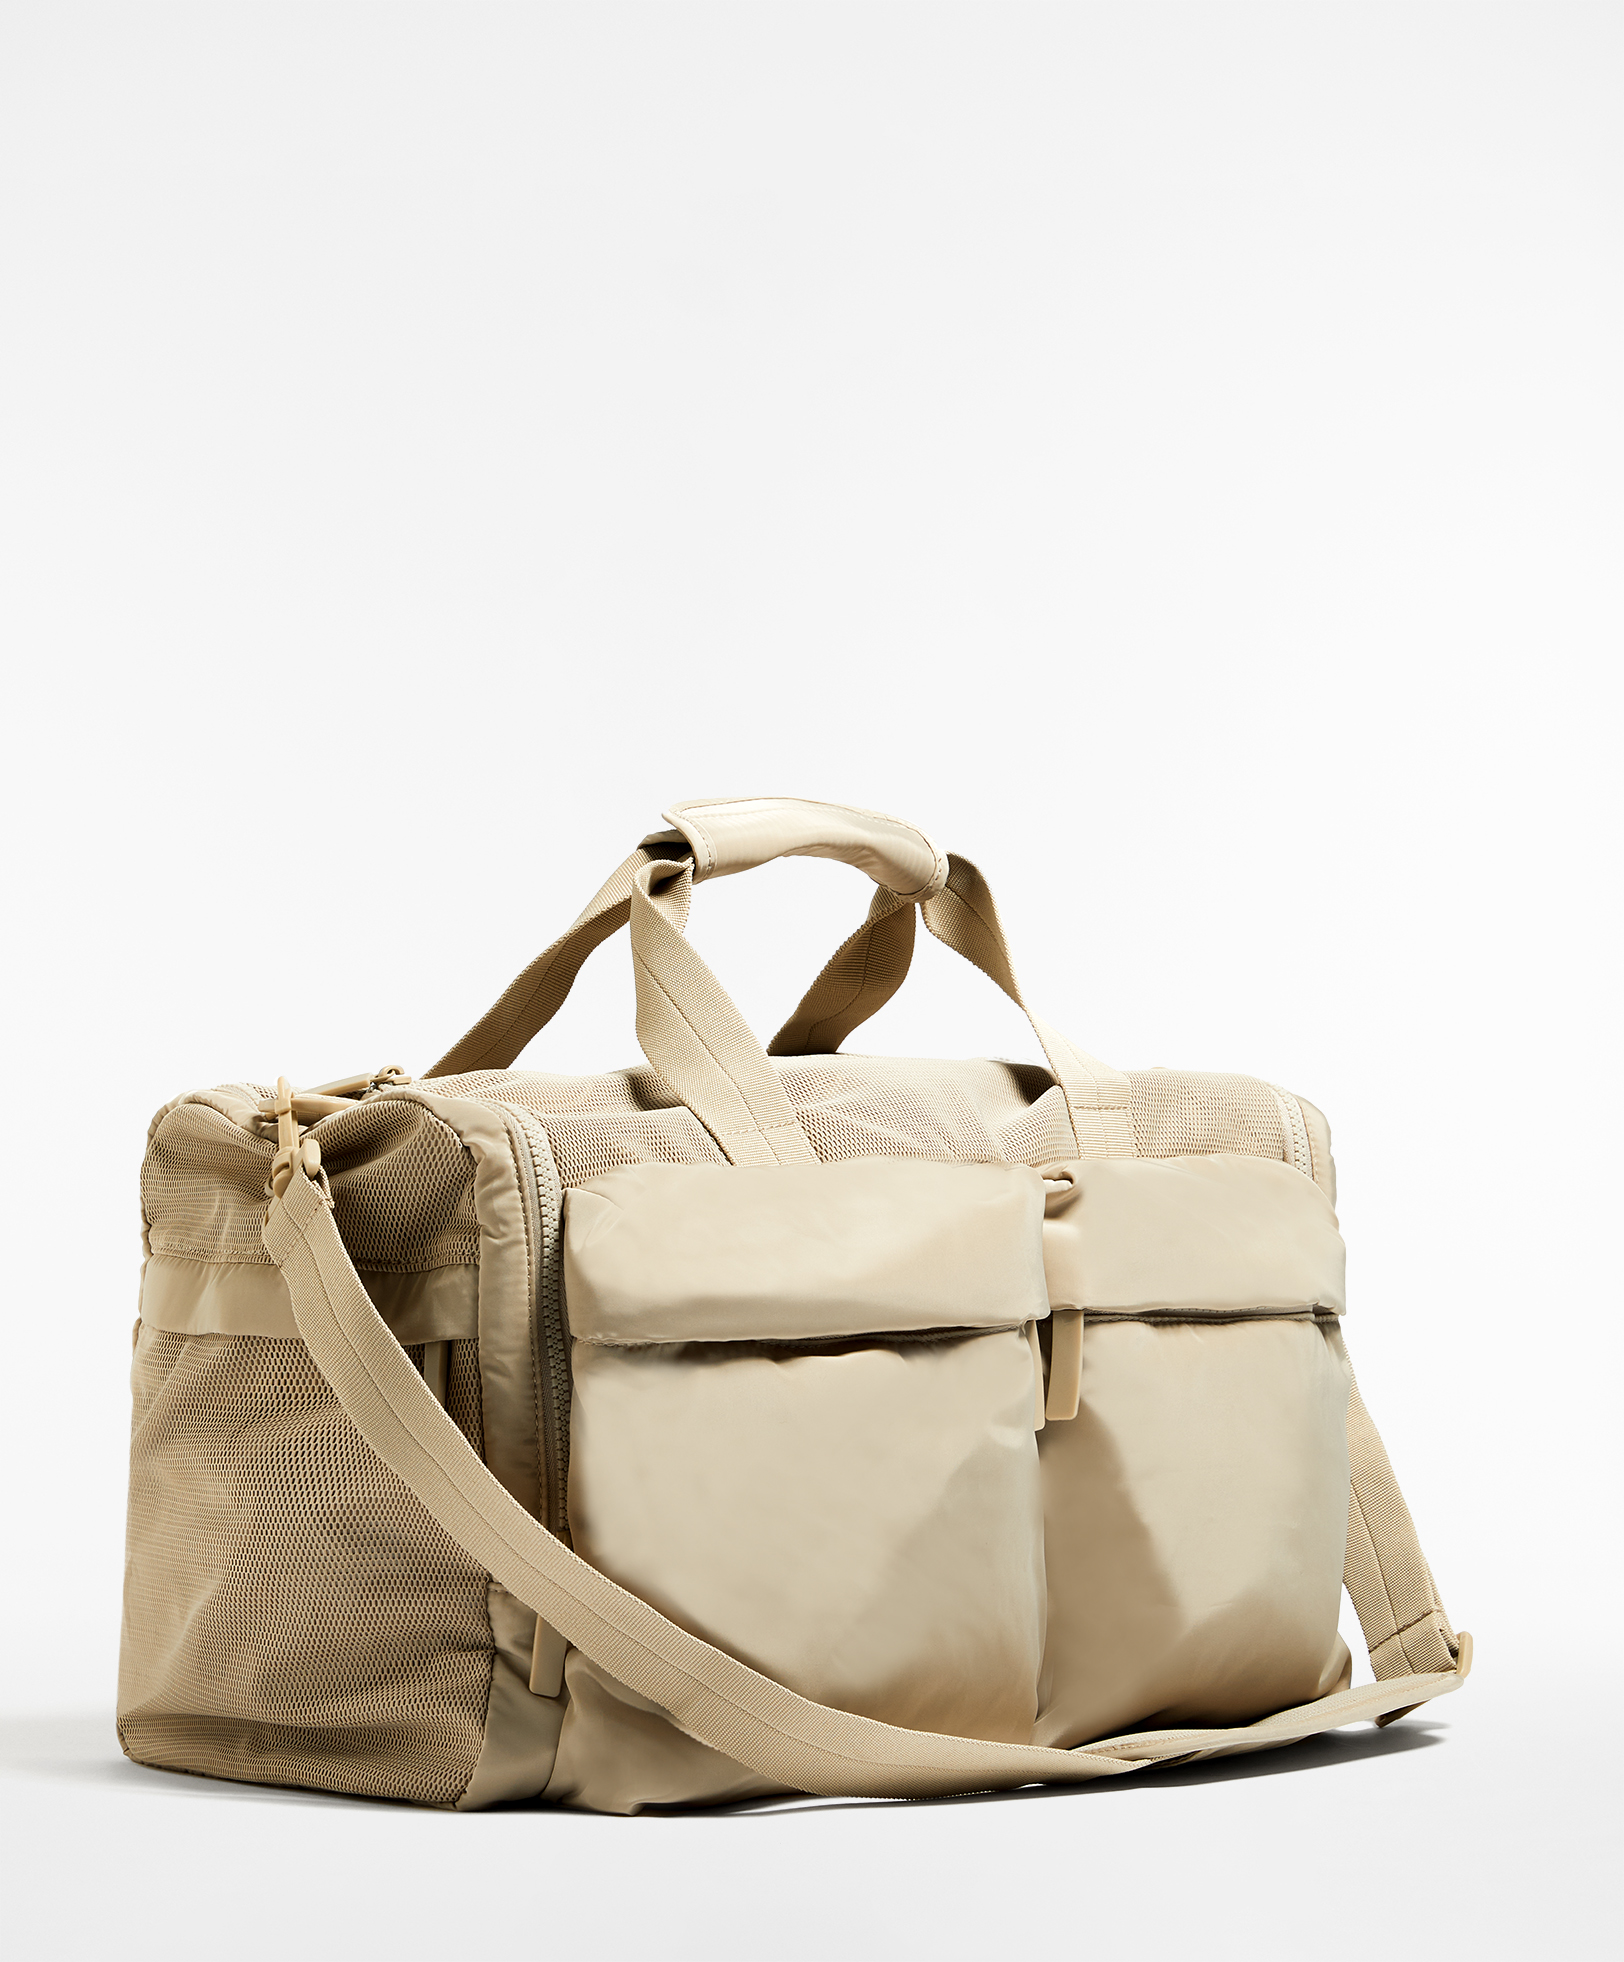 Technical sports bag with front pockets